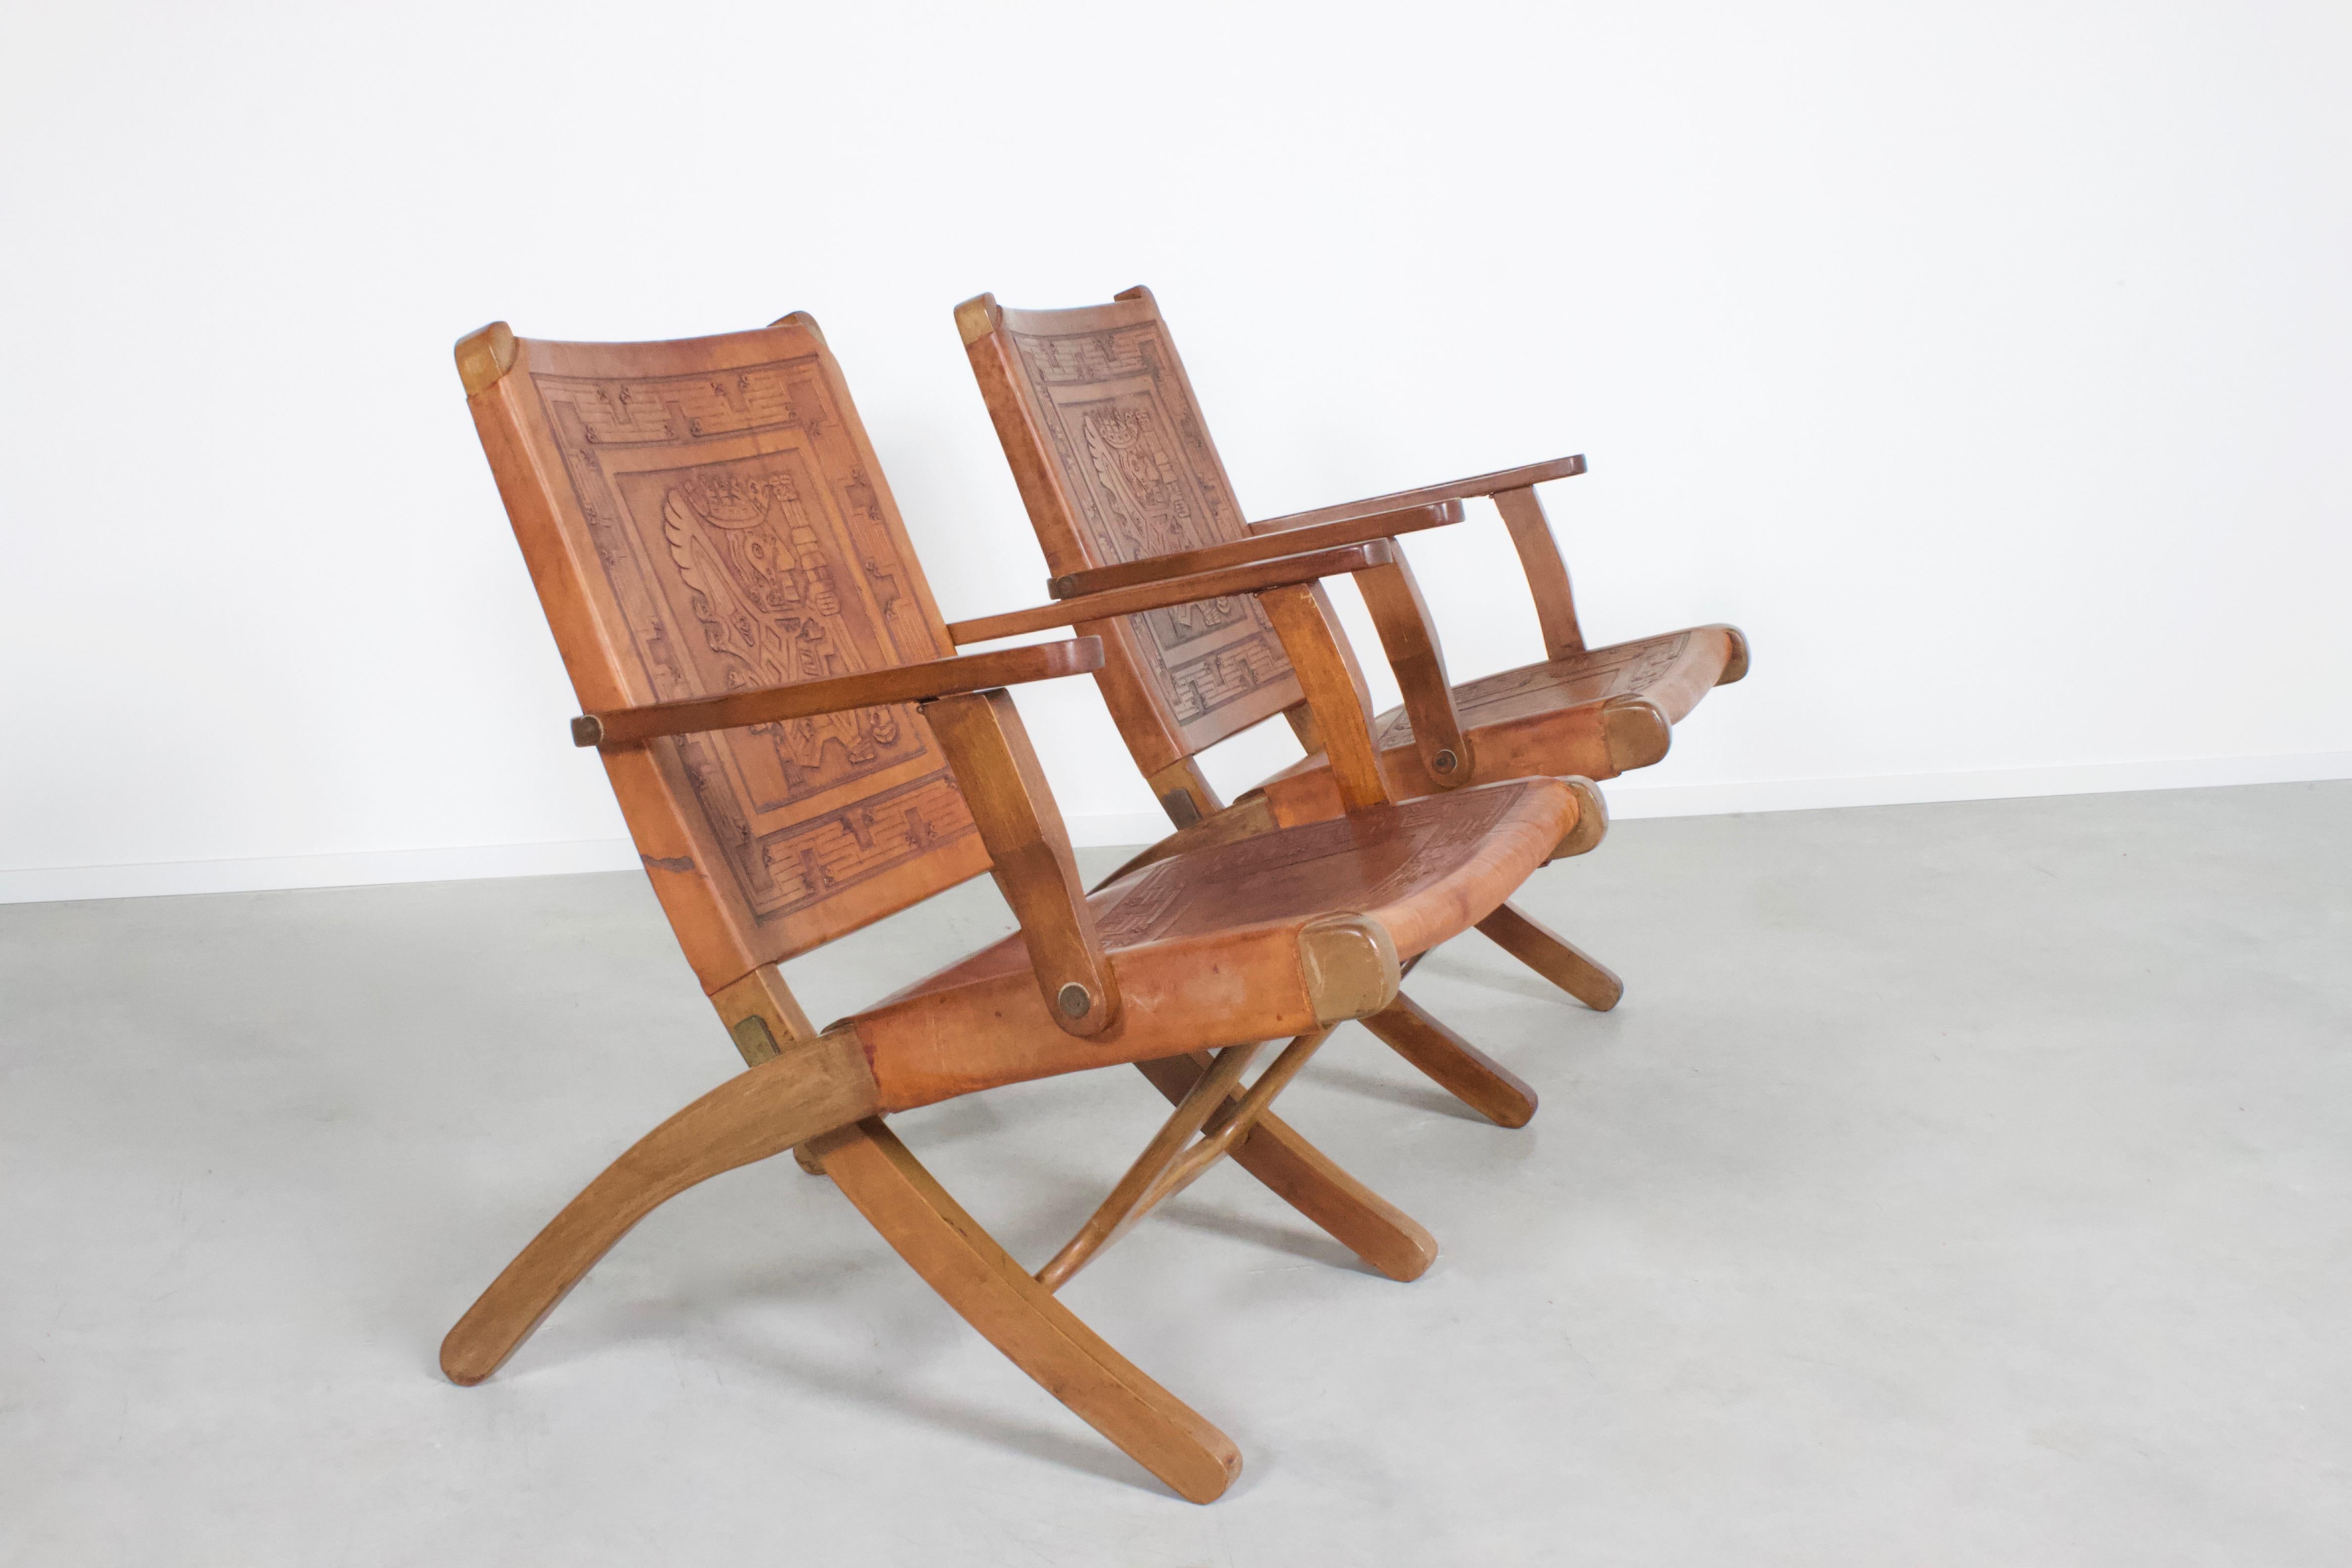 Angel Pazmino folding chairs in good condition.

Manufactured by Muebles de Estilo, Equador

The chairs have a solid Meranti frame and the backrest and seat are made of thick brown saddle leather.

De leather is embossed with Inca patterns and